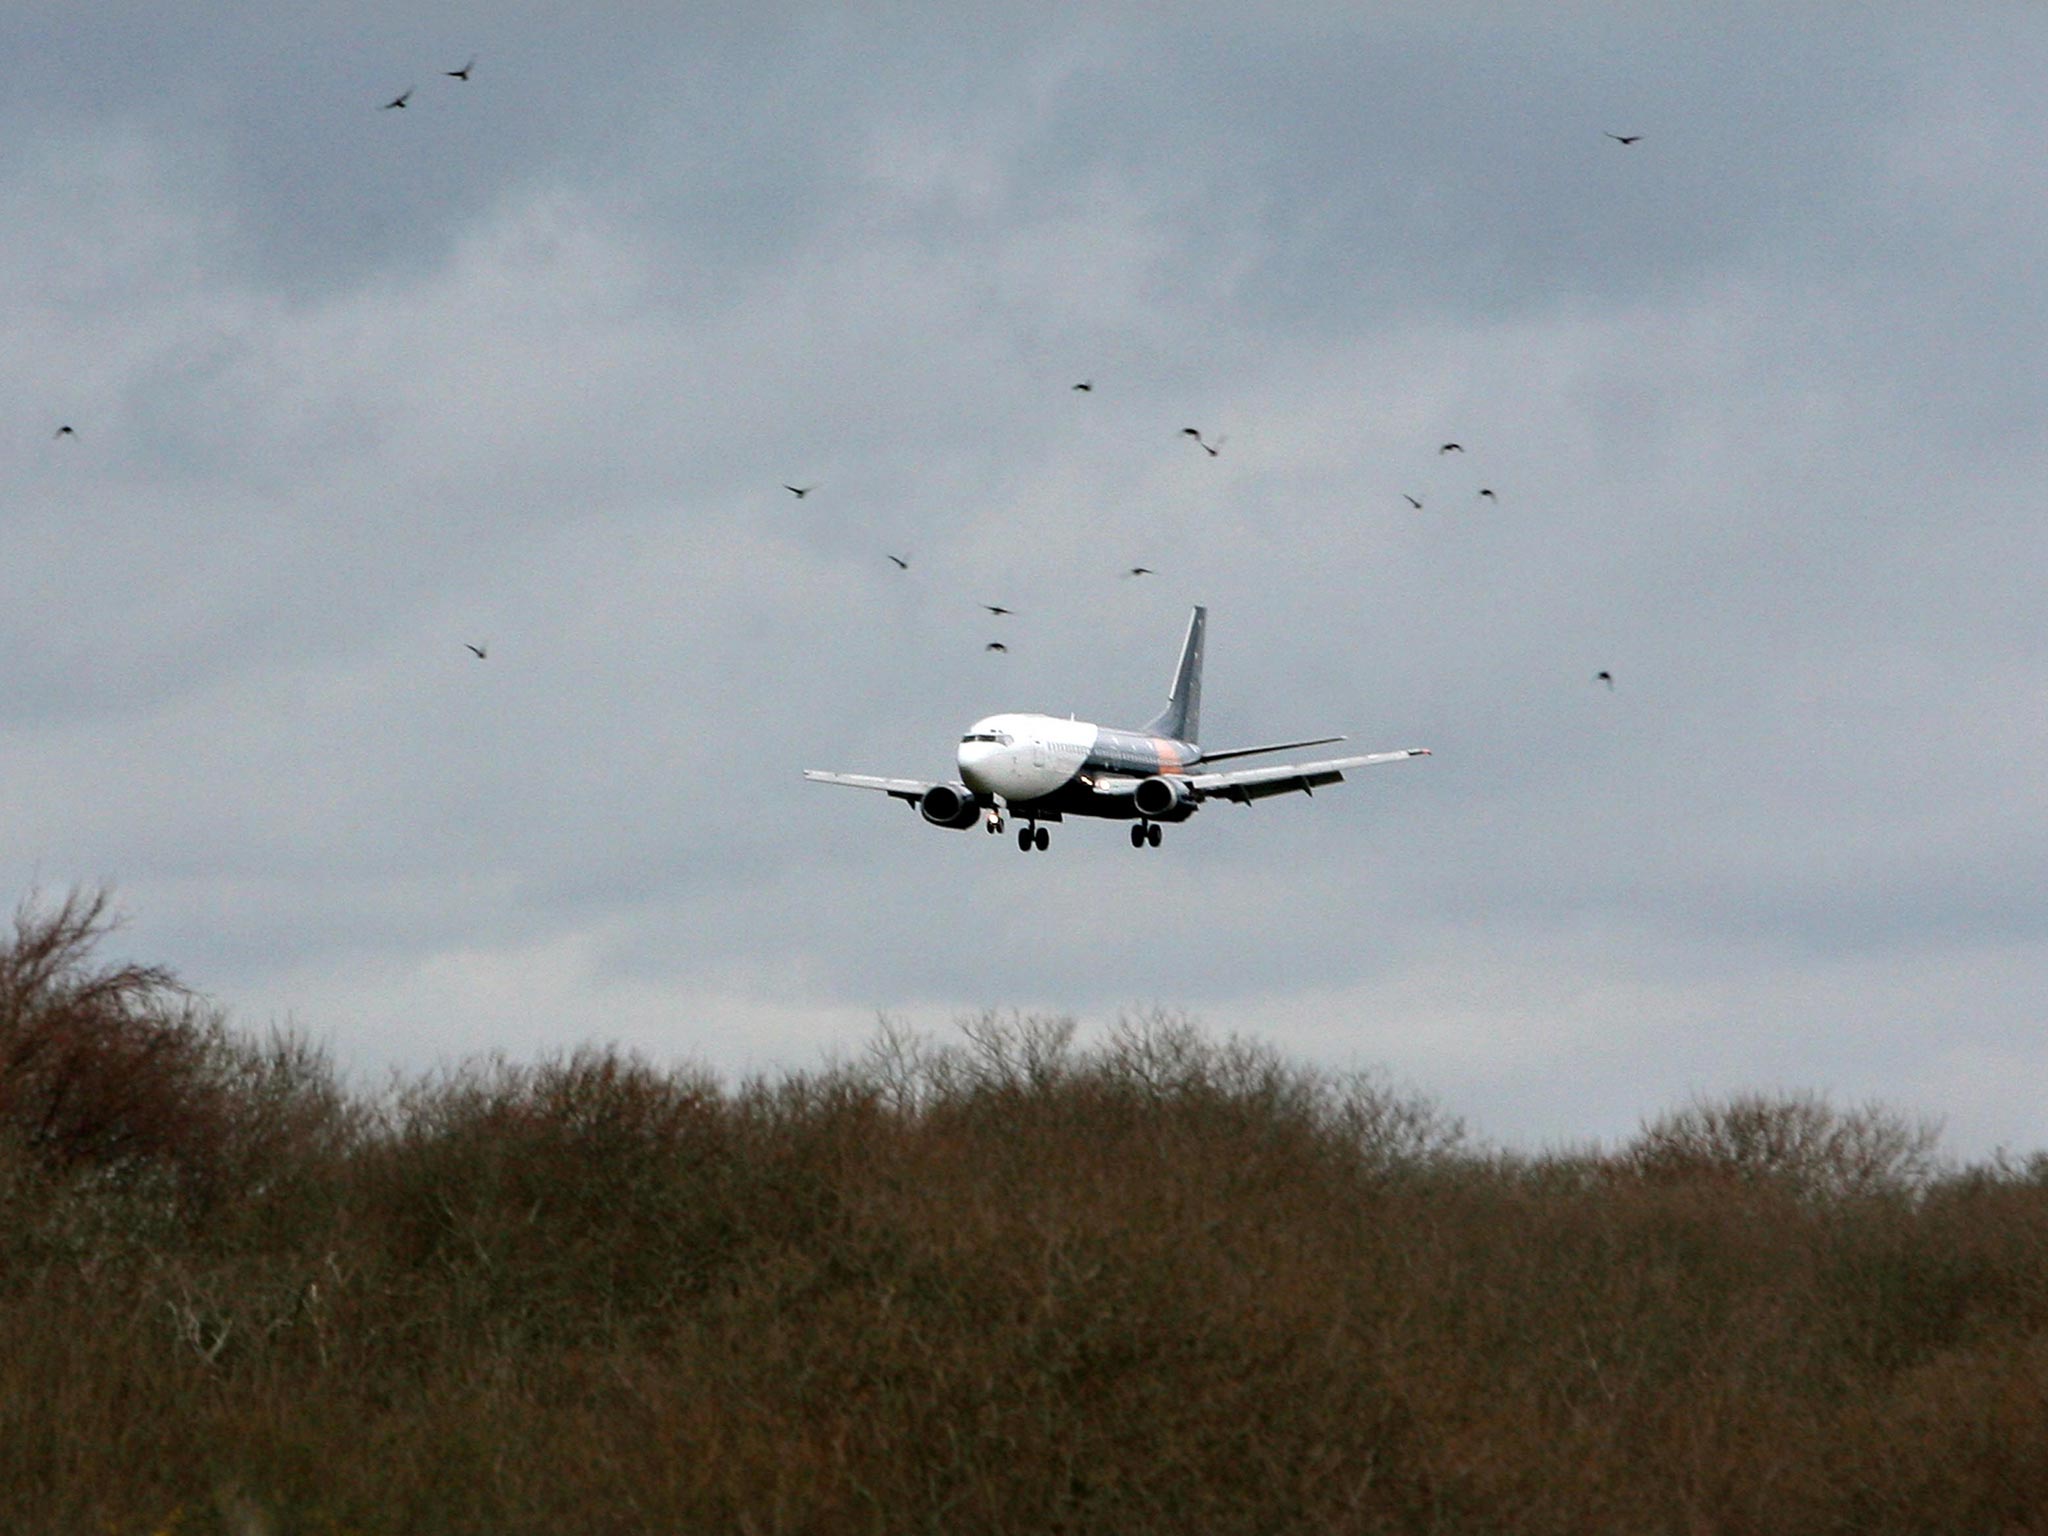 A Boeing 737 is given a test flight at Lydd airport in Kent